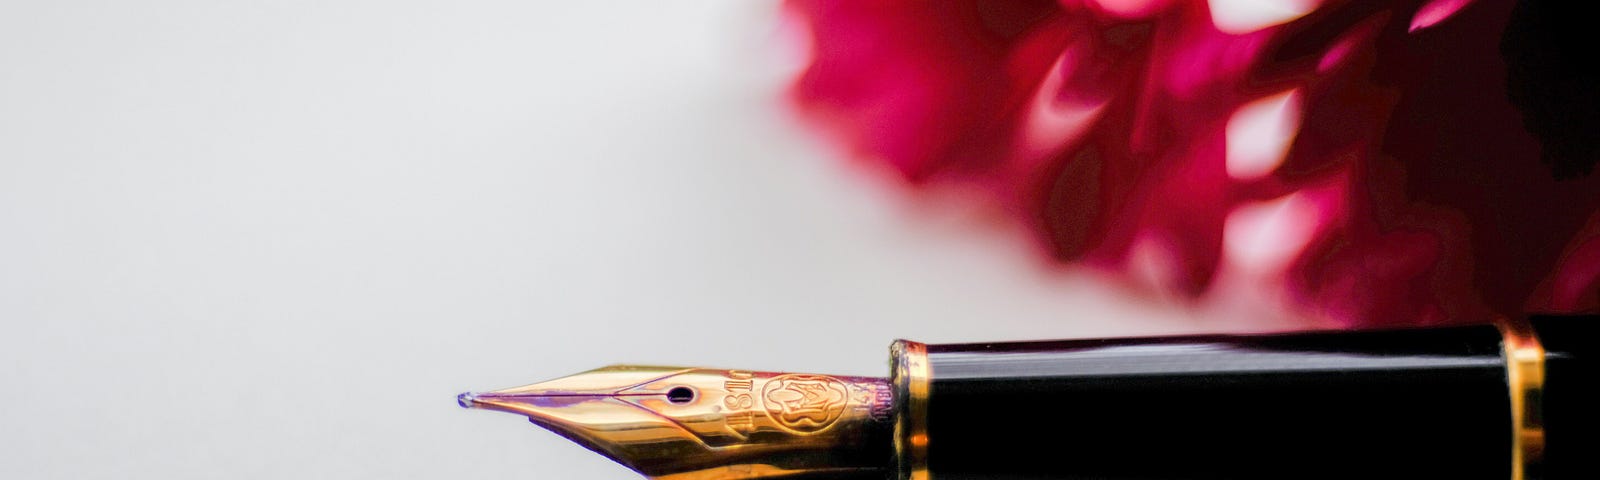 fountain pen with flower